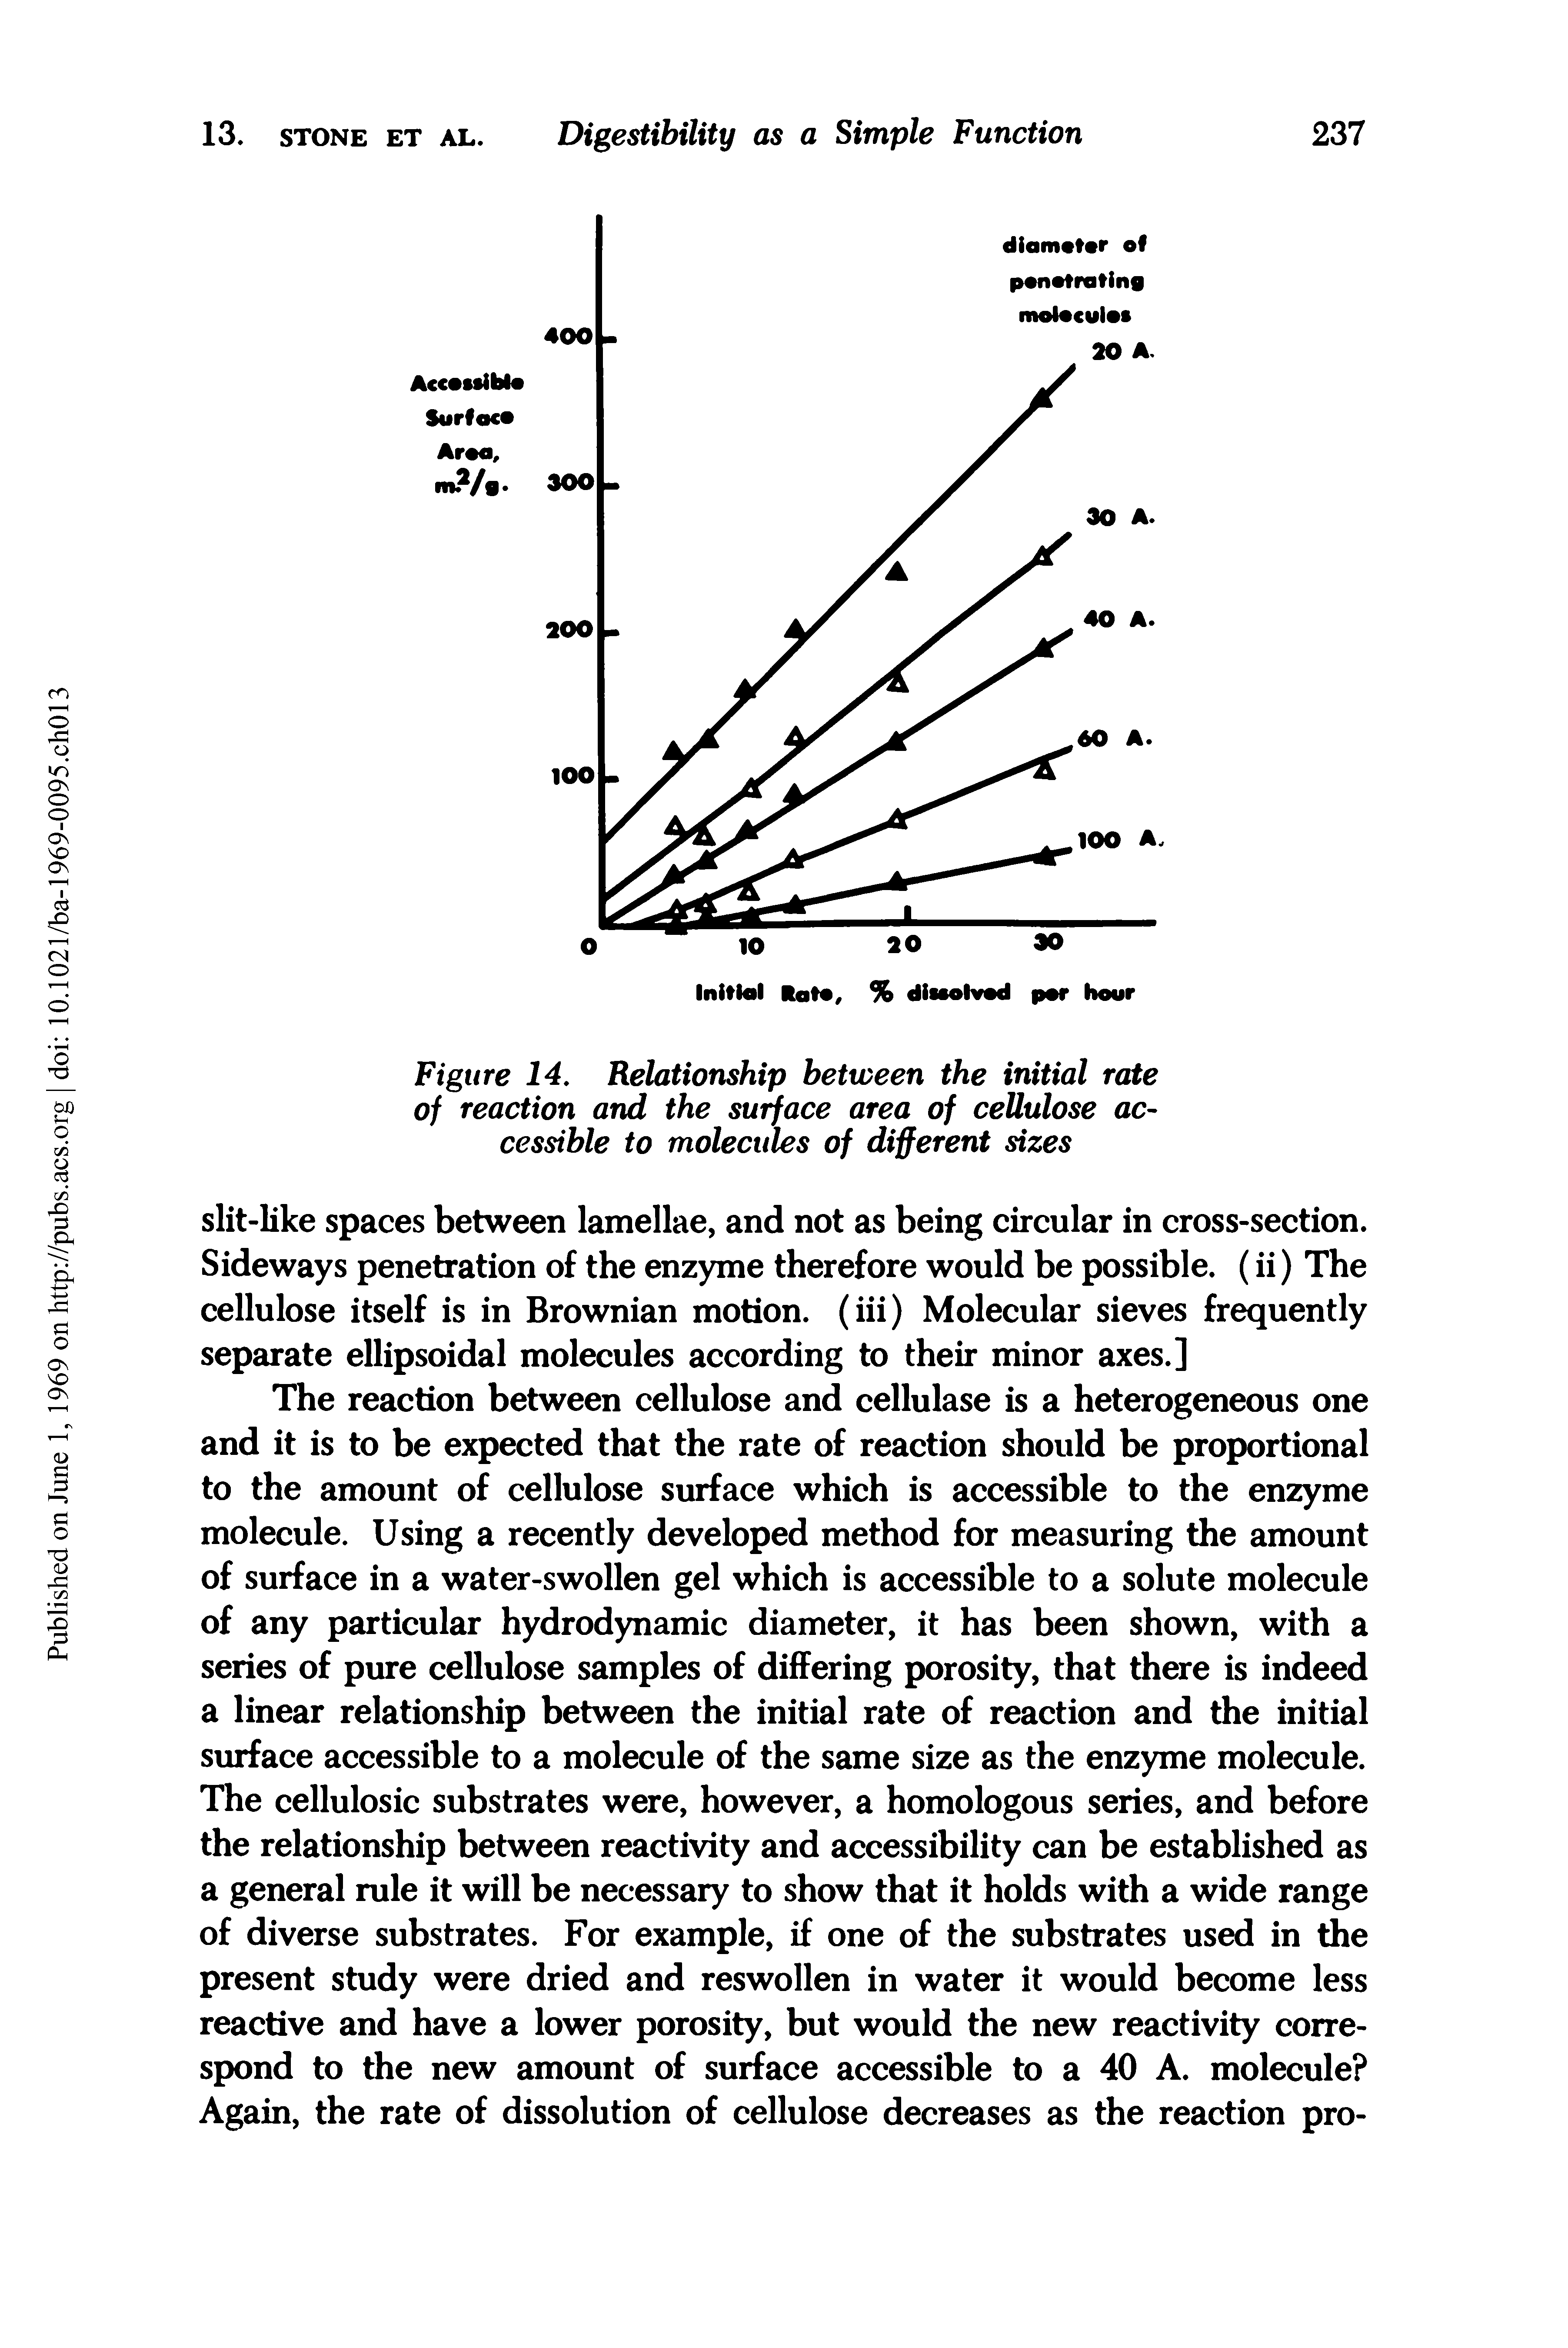 Figure 14. Relationship between the initial rate of reaction and the surface area of cellulose accessible to molecules of different sizes...